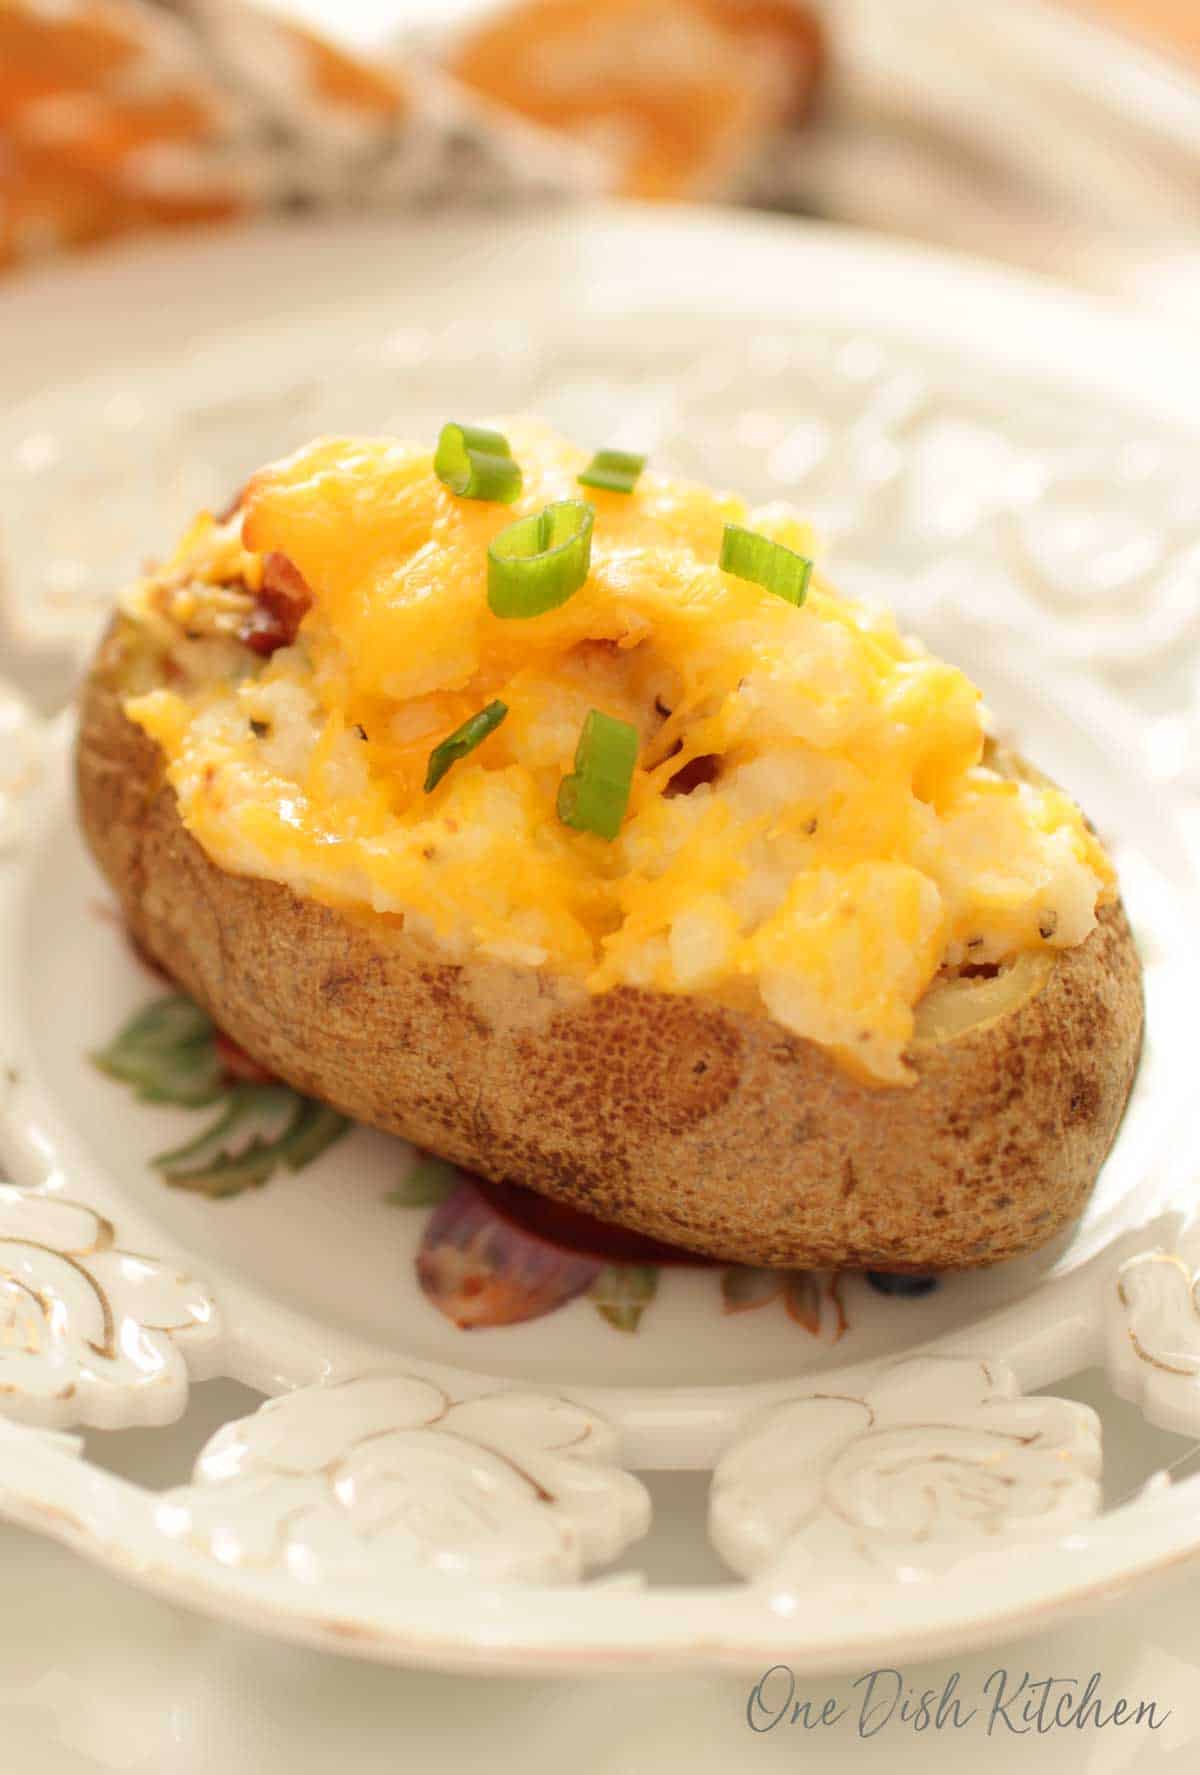 Twice baked potato on a plate topped with cheese and chopped green onions